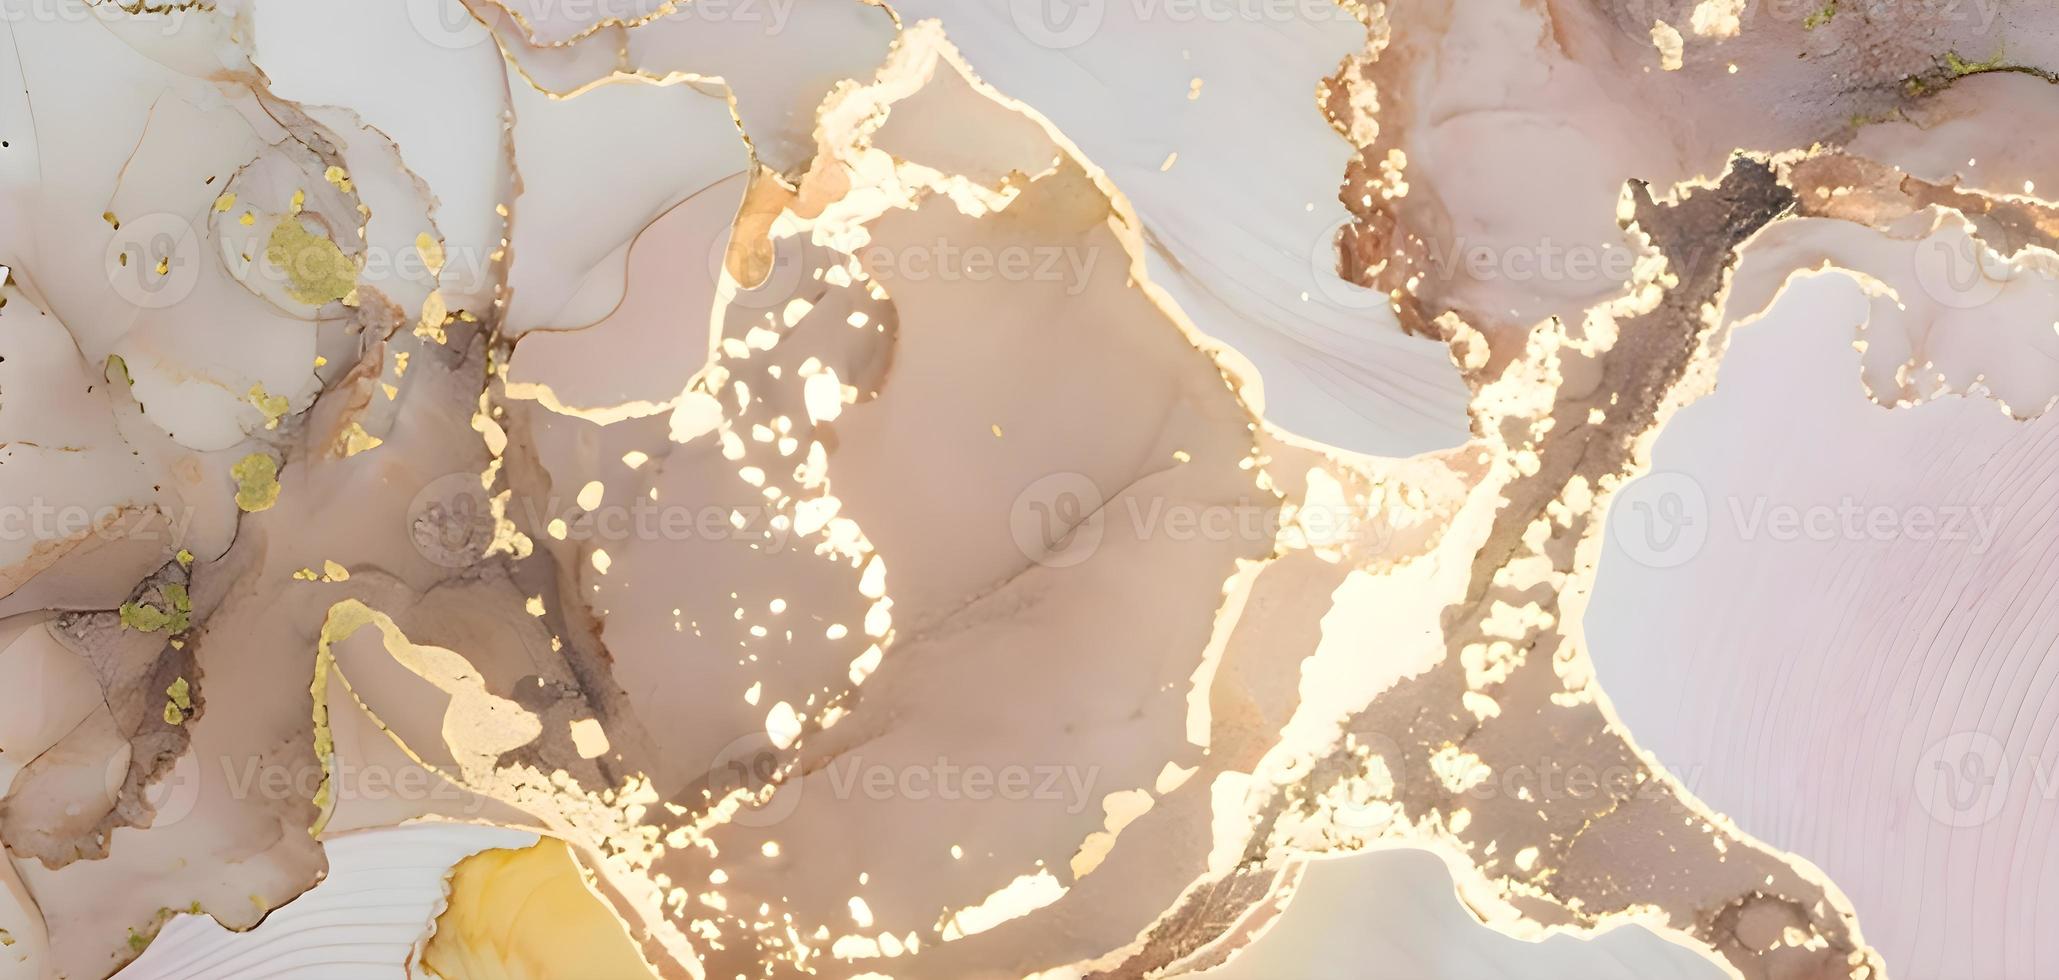 Abstract beige or cream Marble texture background. Detailed Natural Marble surface